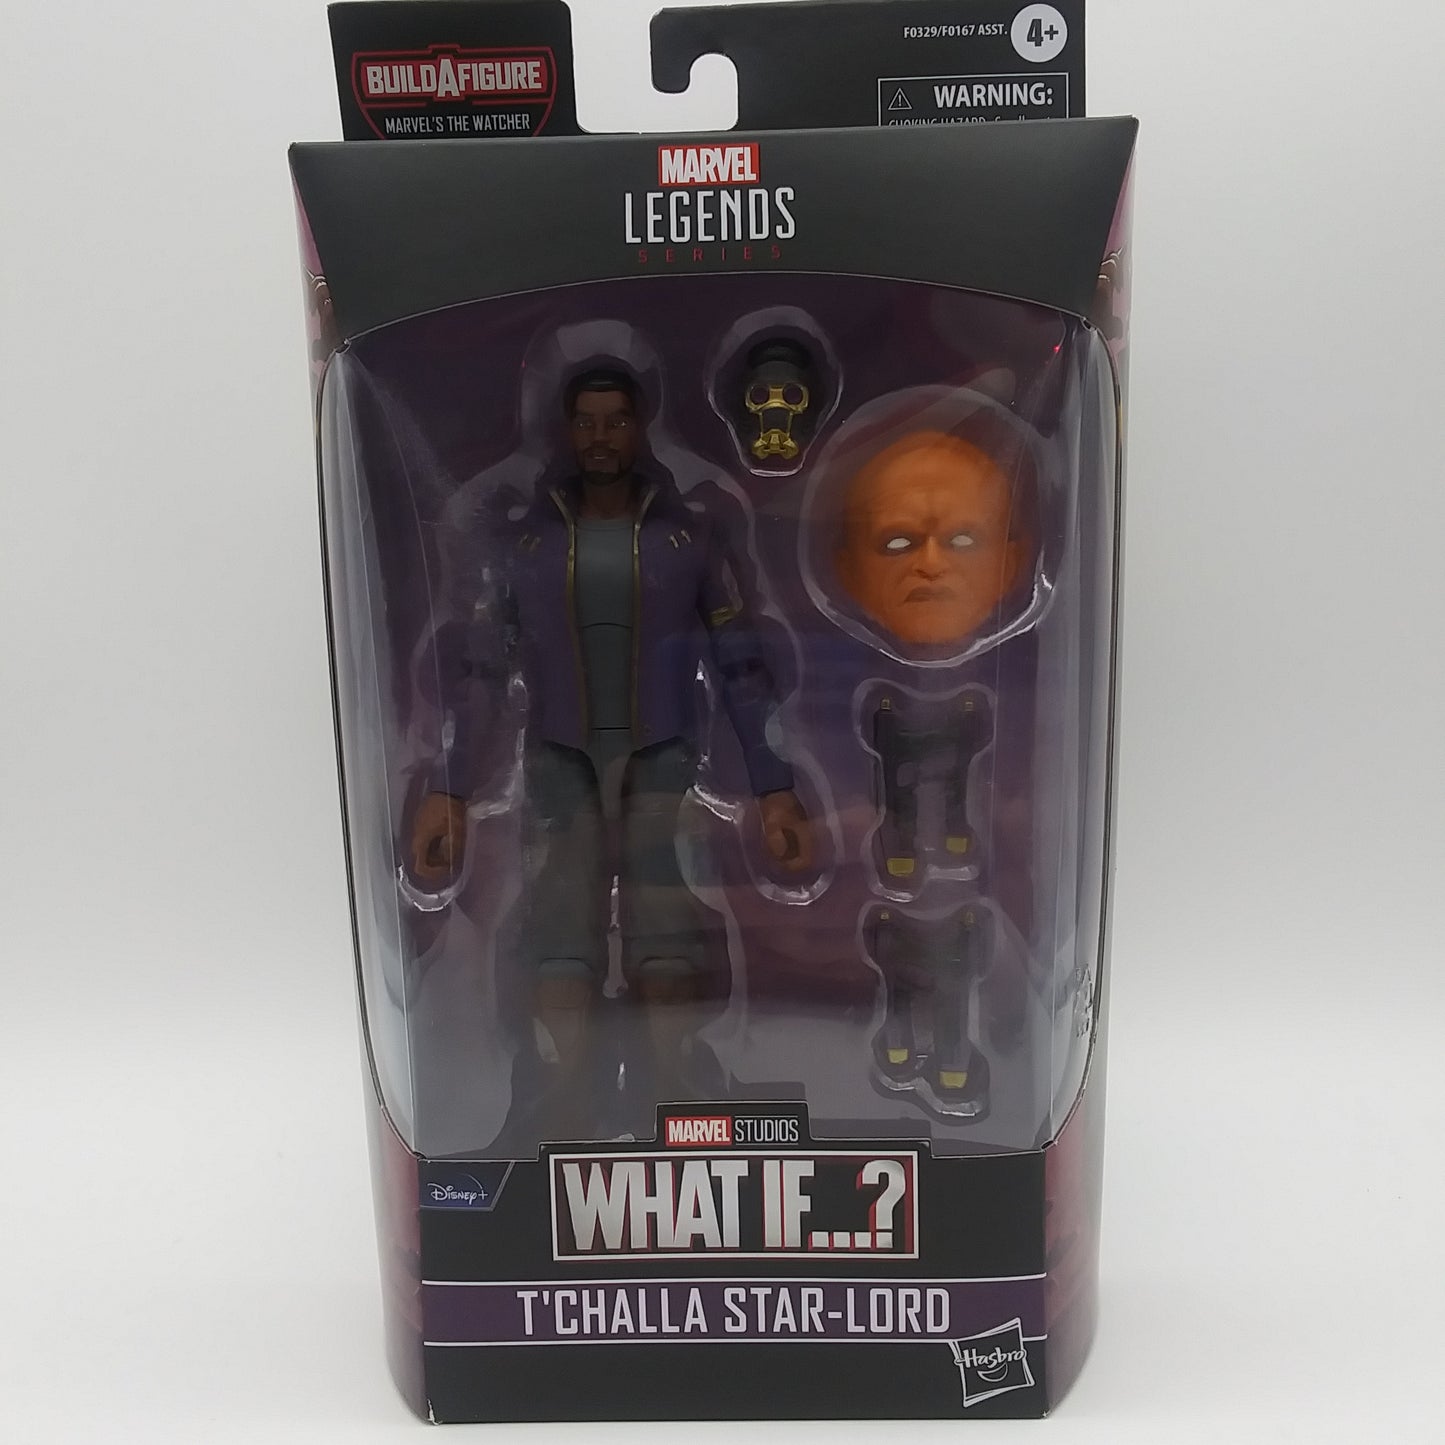 Marvel Legends What If? T'challla Star-Lord